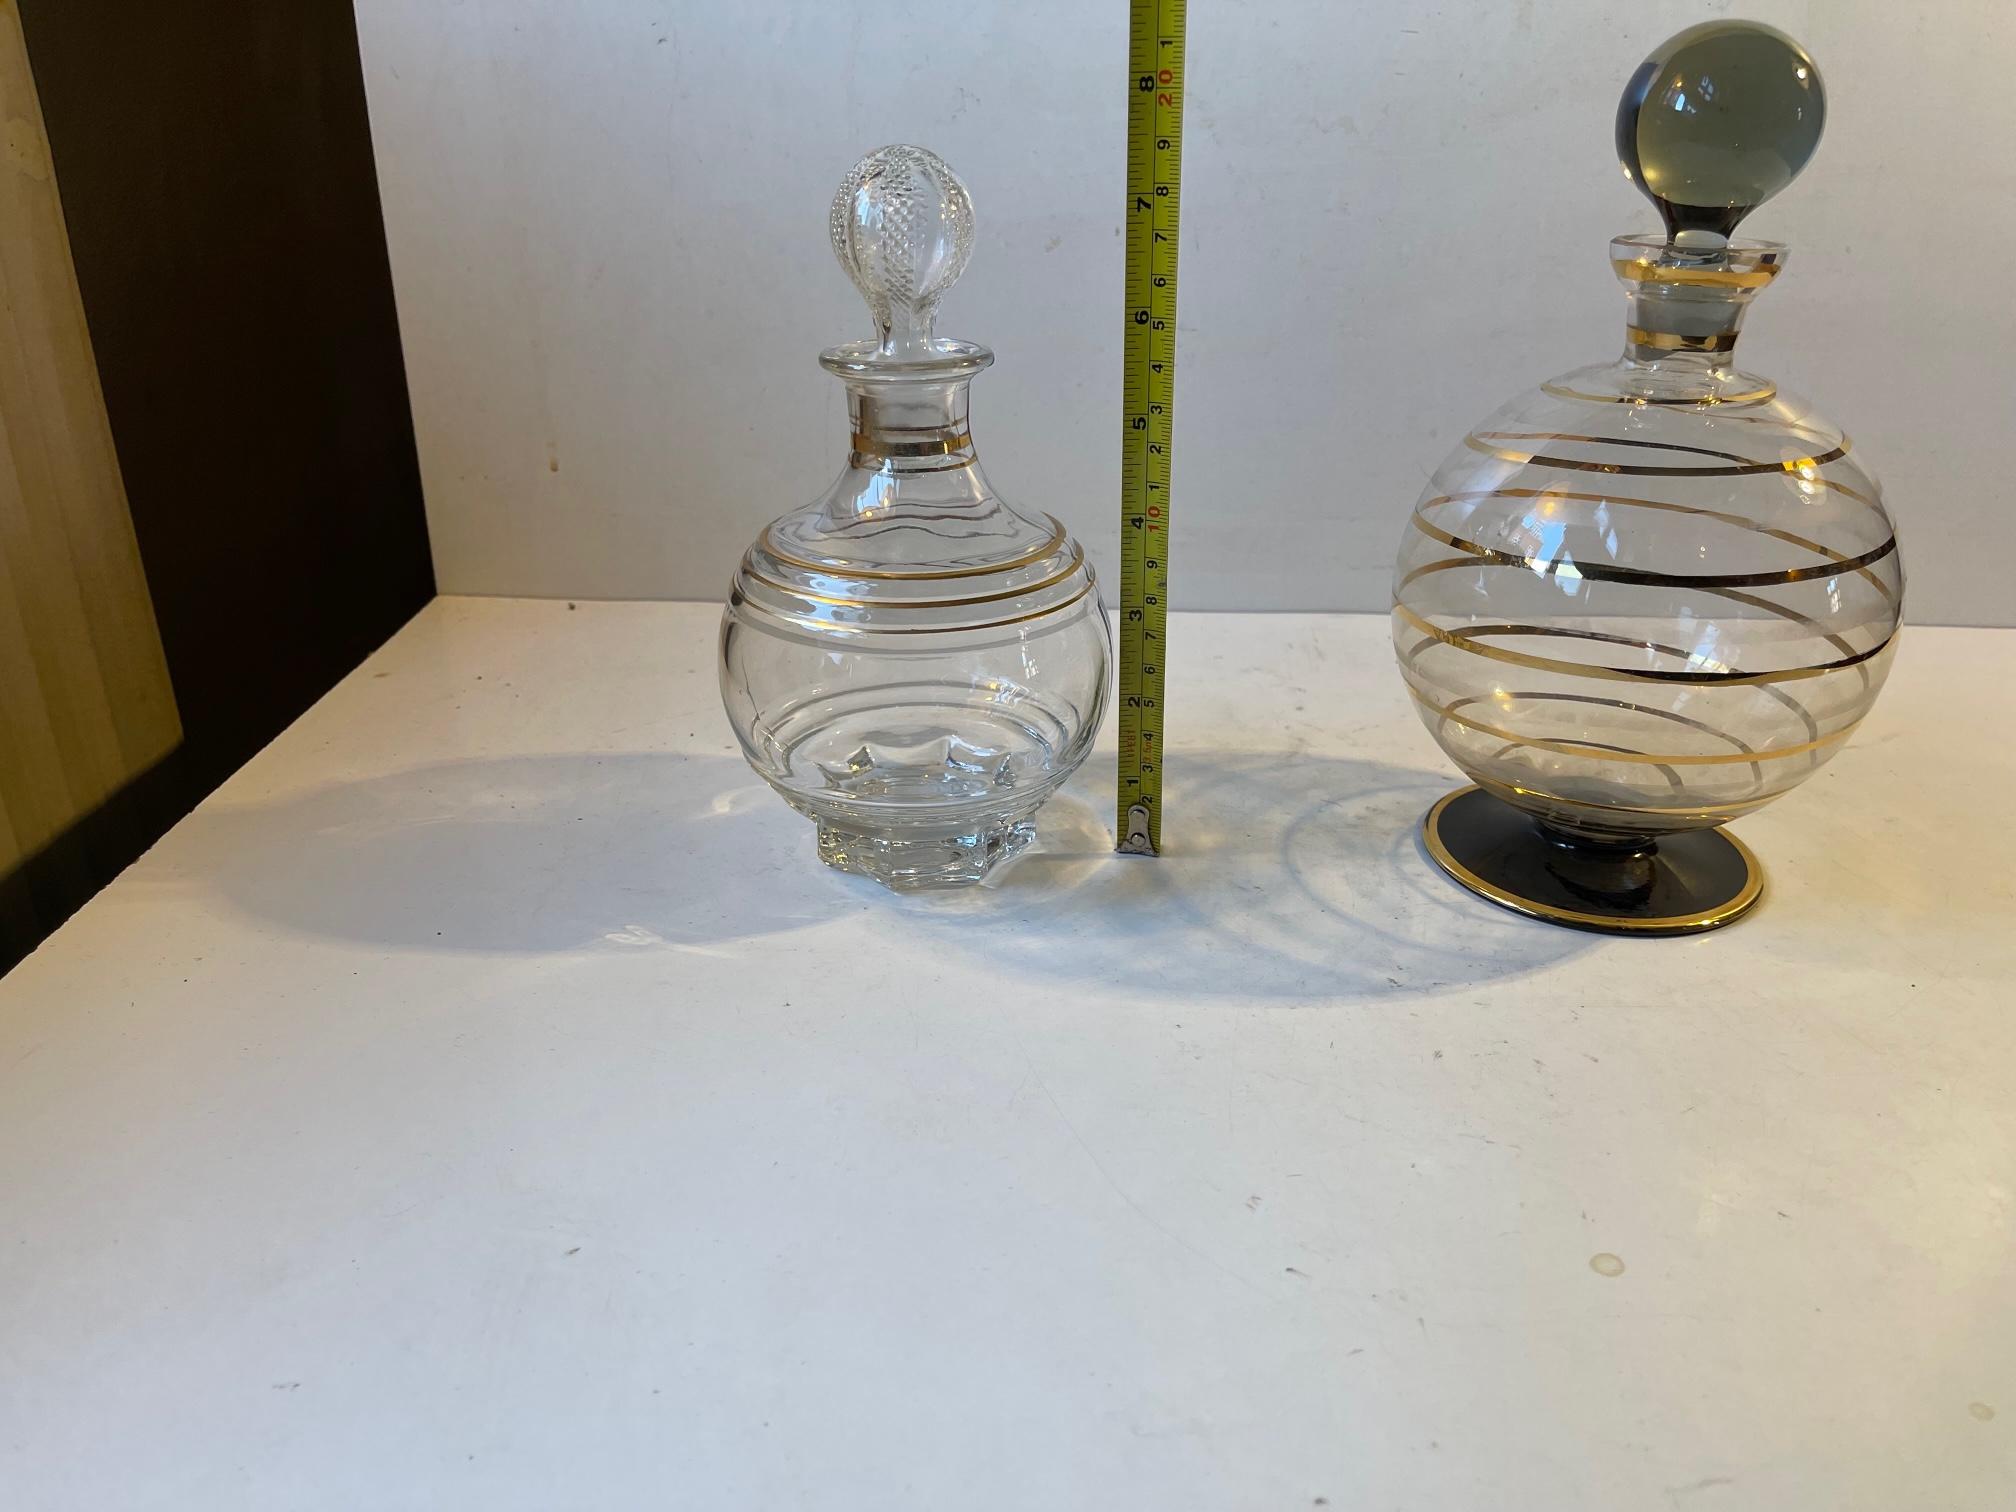 Spherical Italian Decanters in Striped Glass, Set of 2 In Good Condition For Sale In Esbjerg, DK